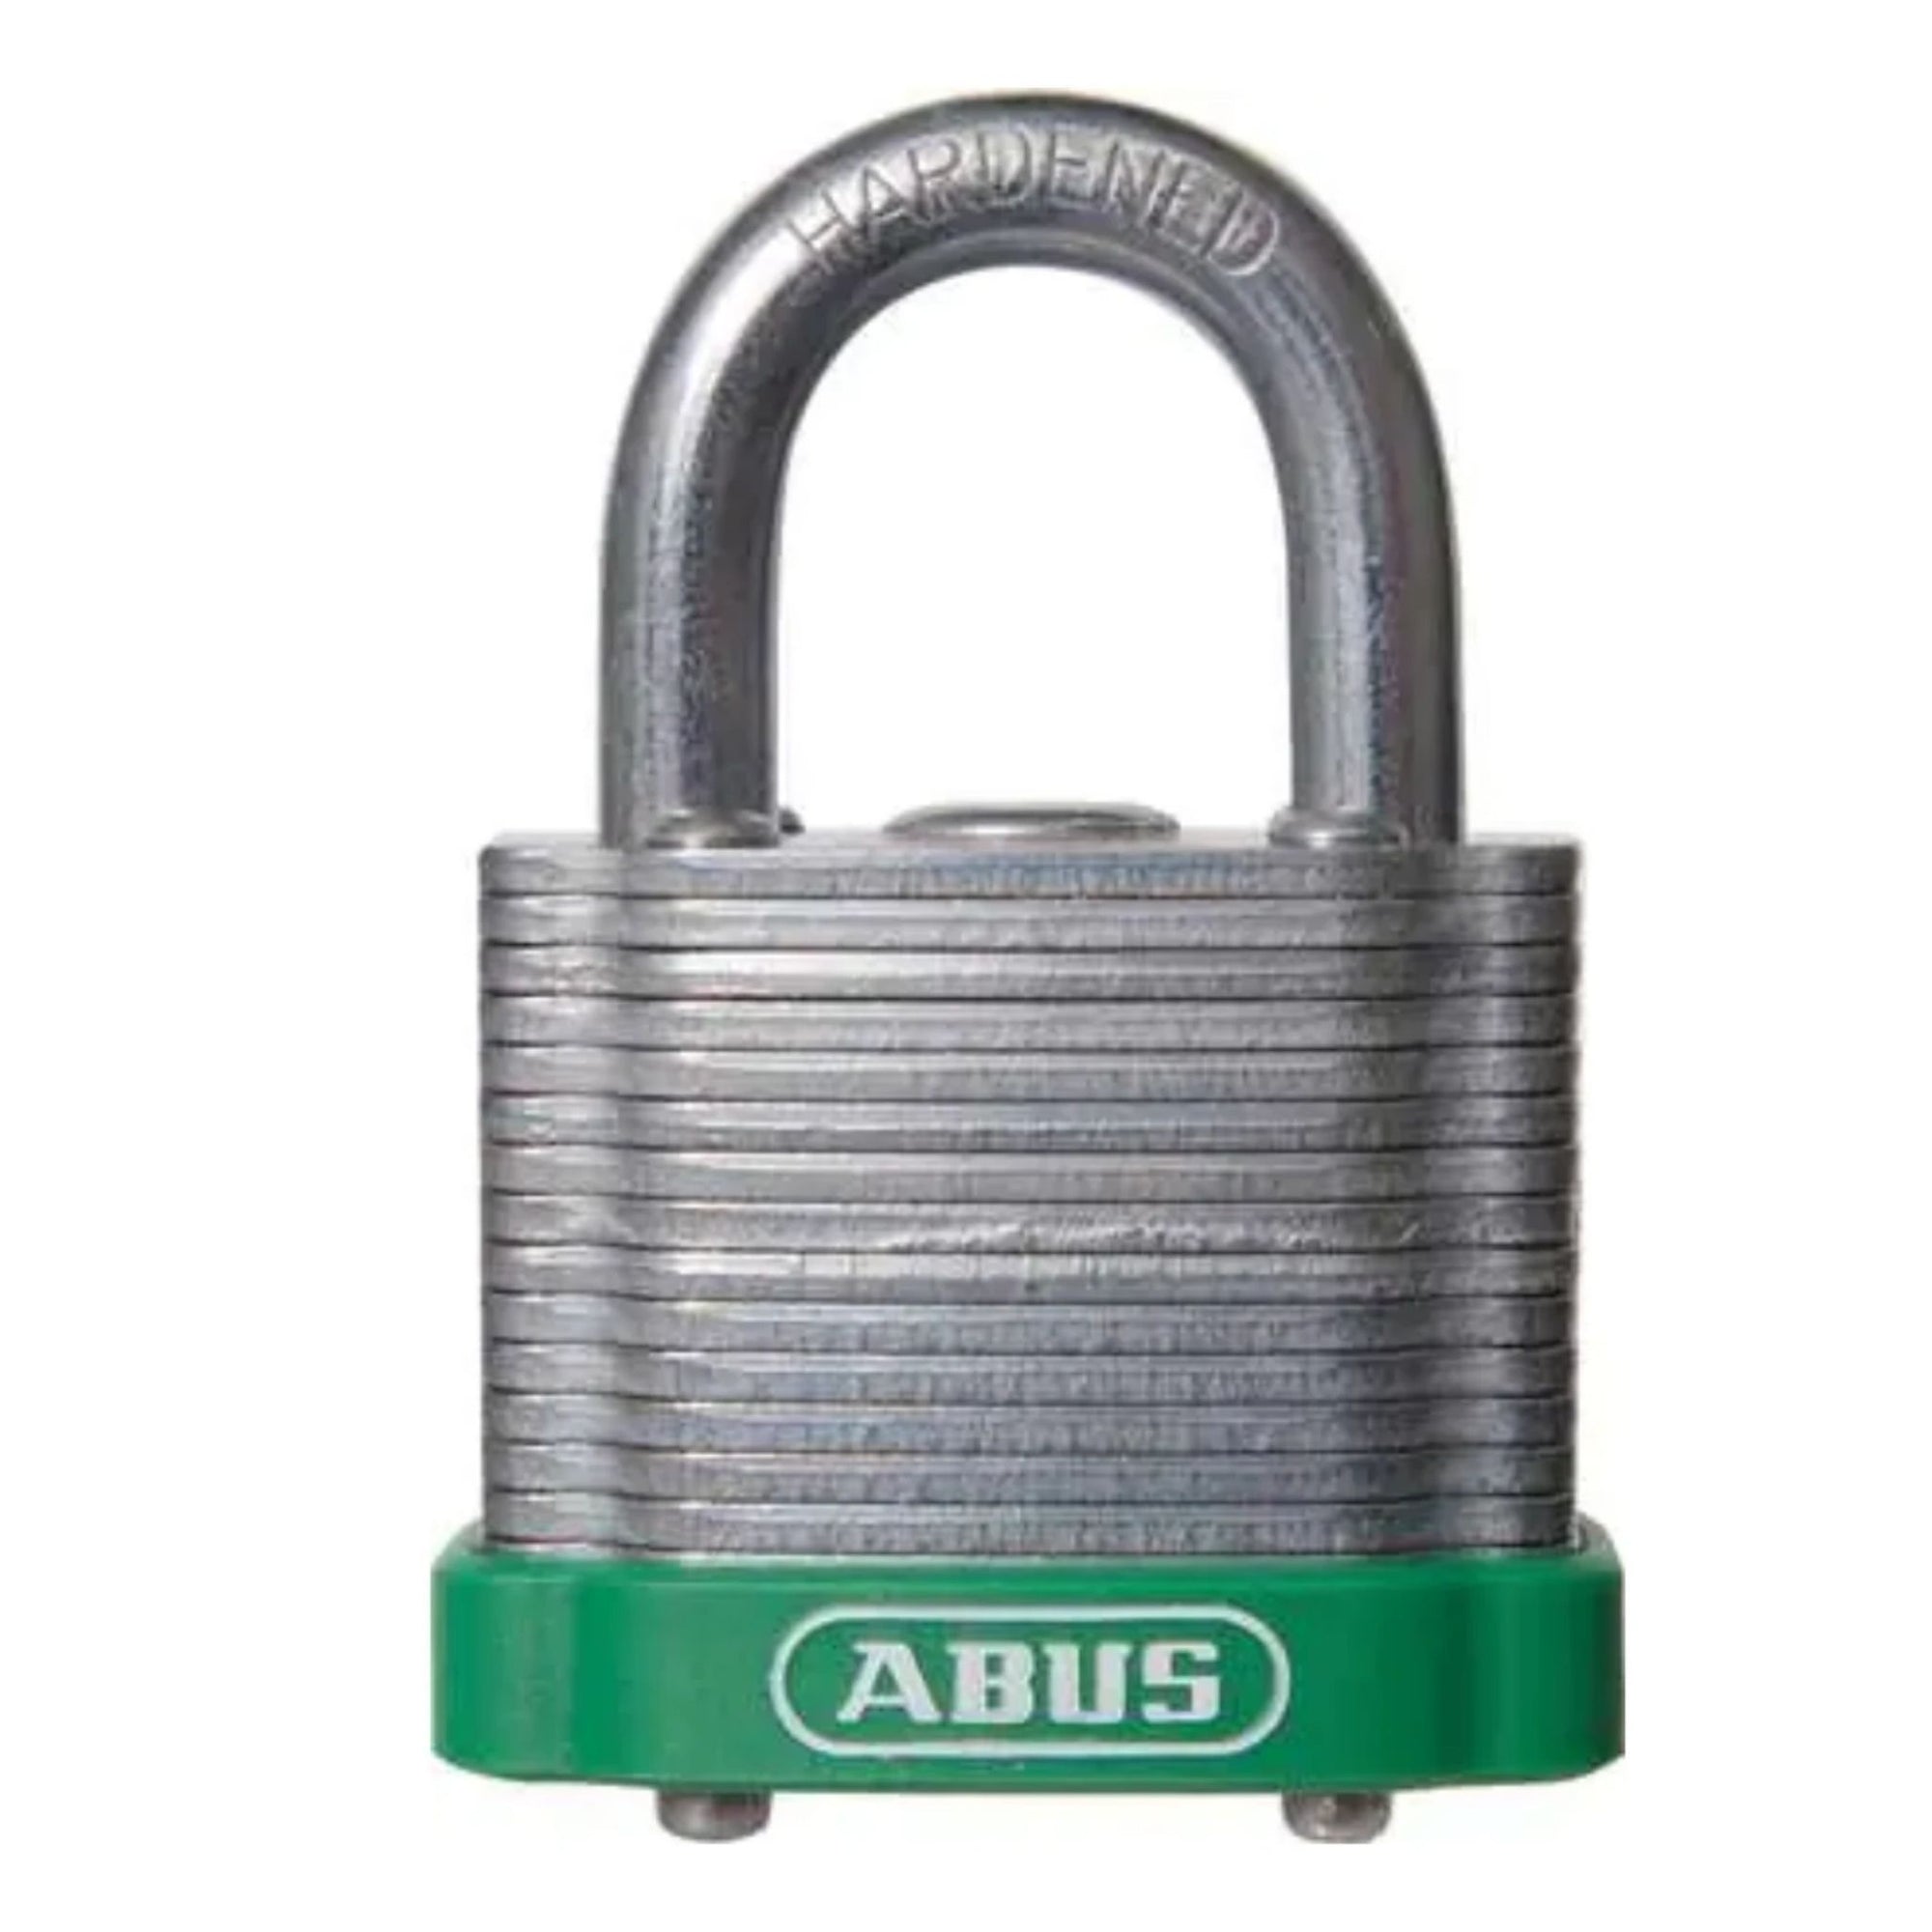 Abus 41/40 Laminated Steel Locks with Colored Plastic Bumpers and Eterna Coating - The Lock Source